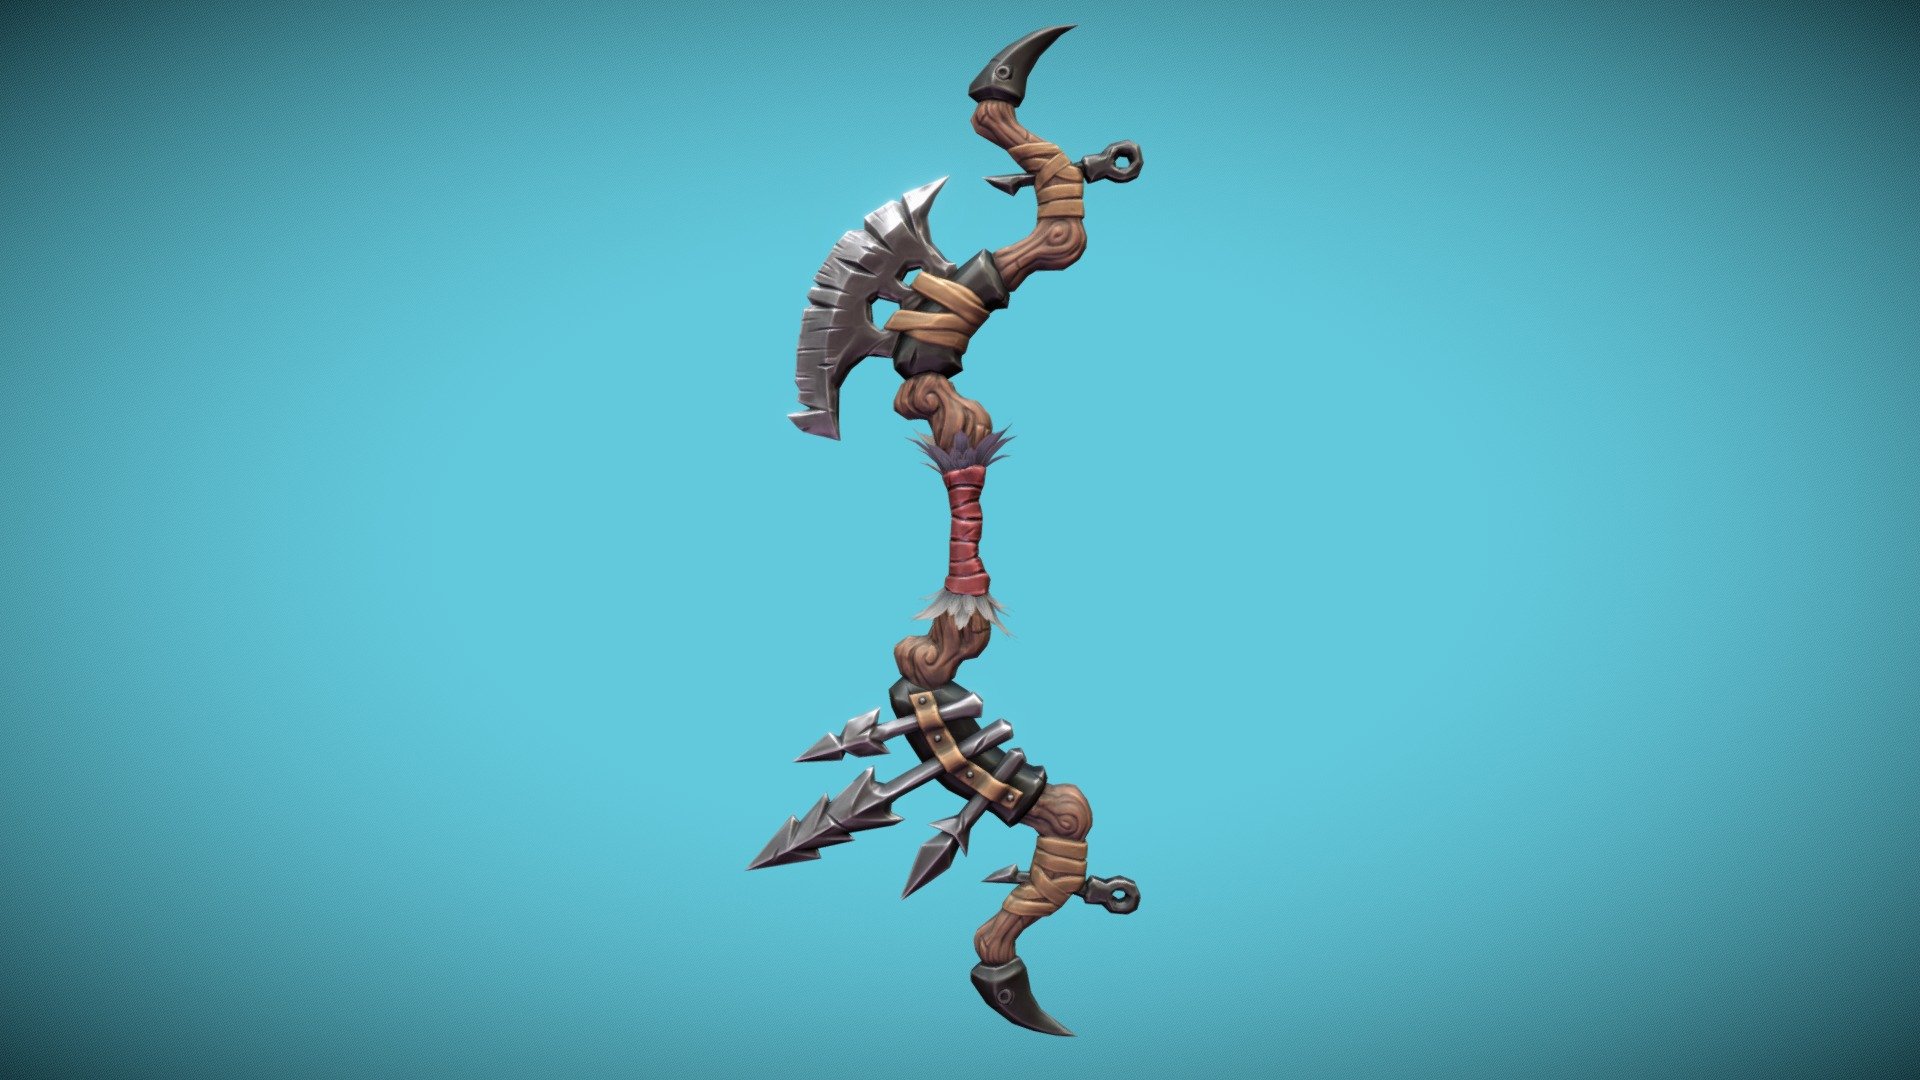 World of Warcraft: Warlords of Draenor weapon
The Original Concept art is from (Christopher Hayes) https://www.artstation.com/craze

The model is created in blender and textures using substance painter. 
https://www.artstation.com/jeromeangeles

Handpainted style 2K textures 3d model